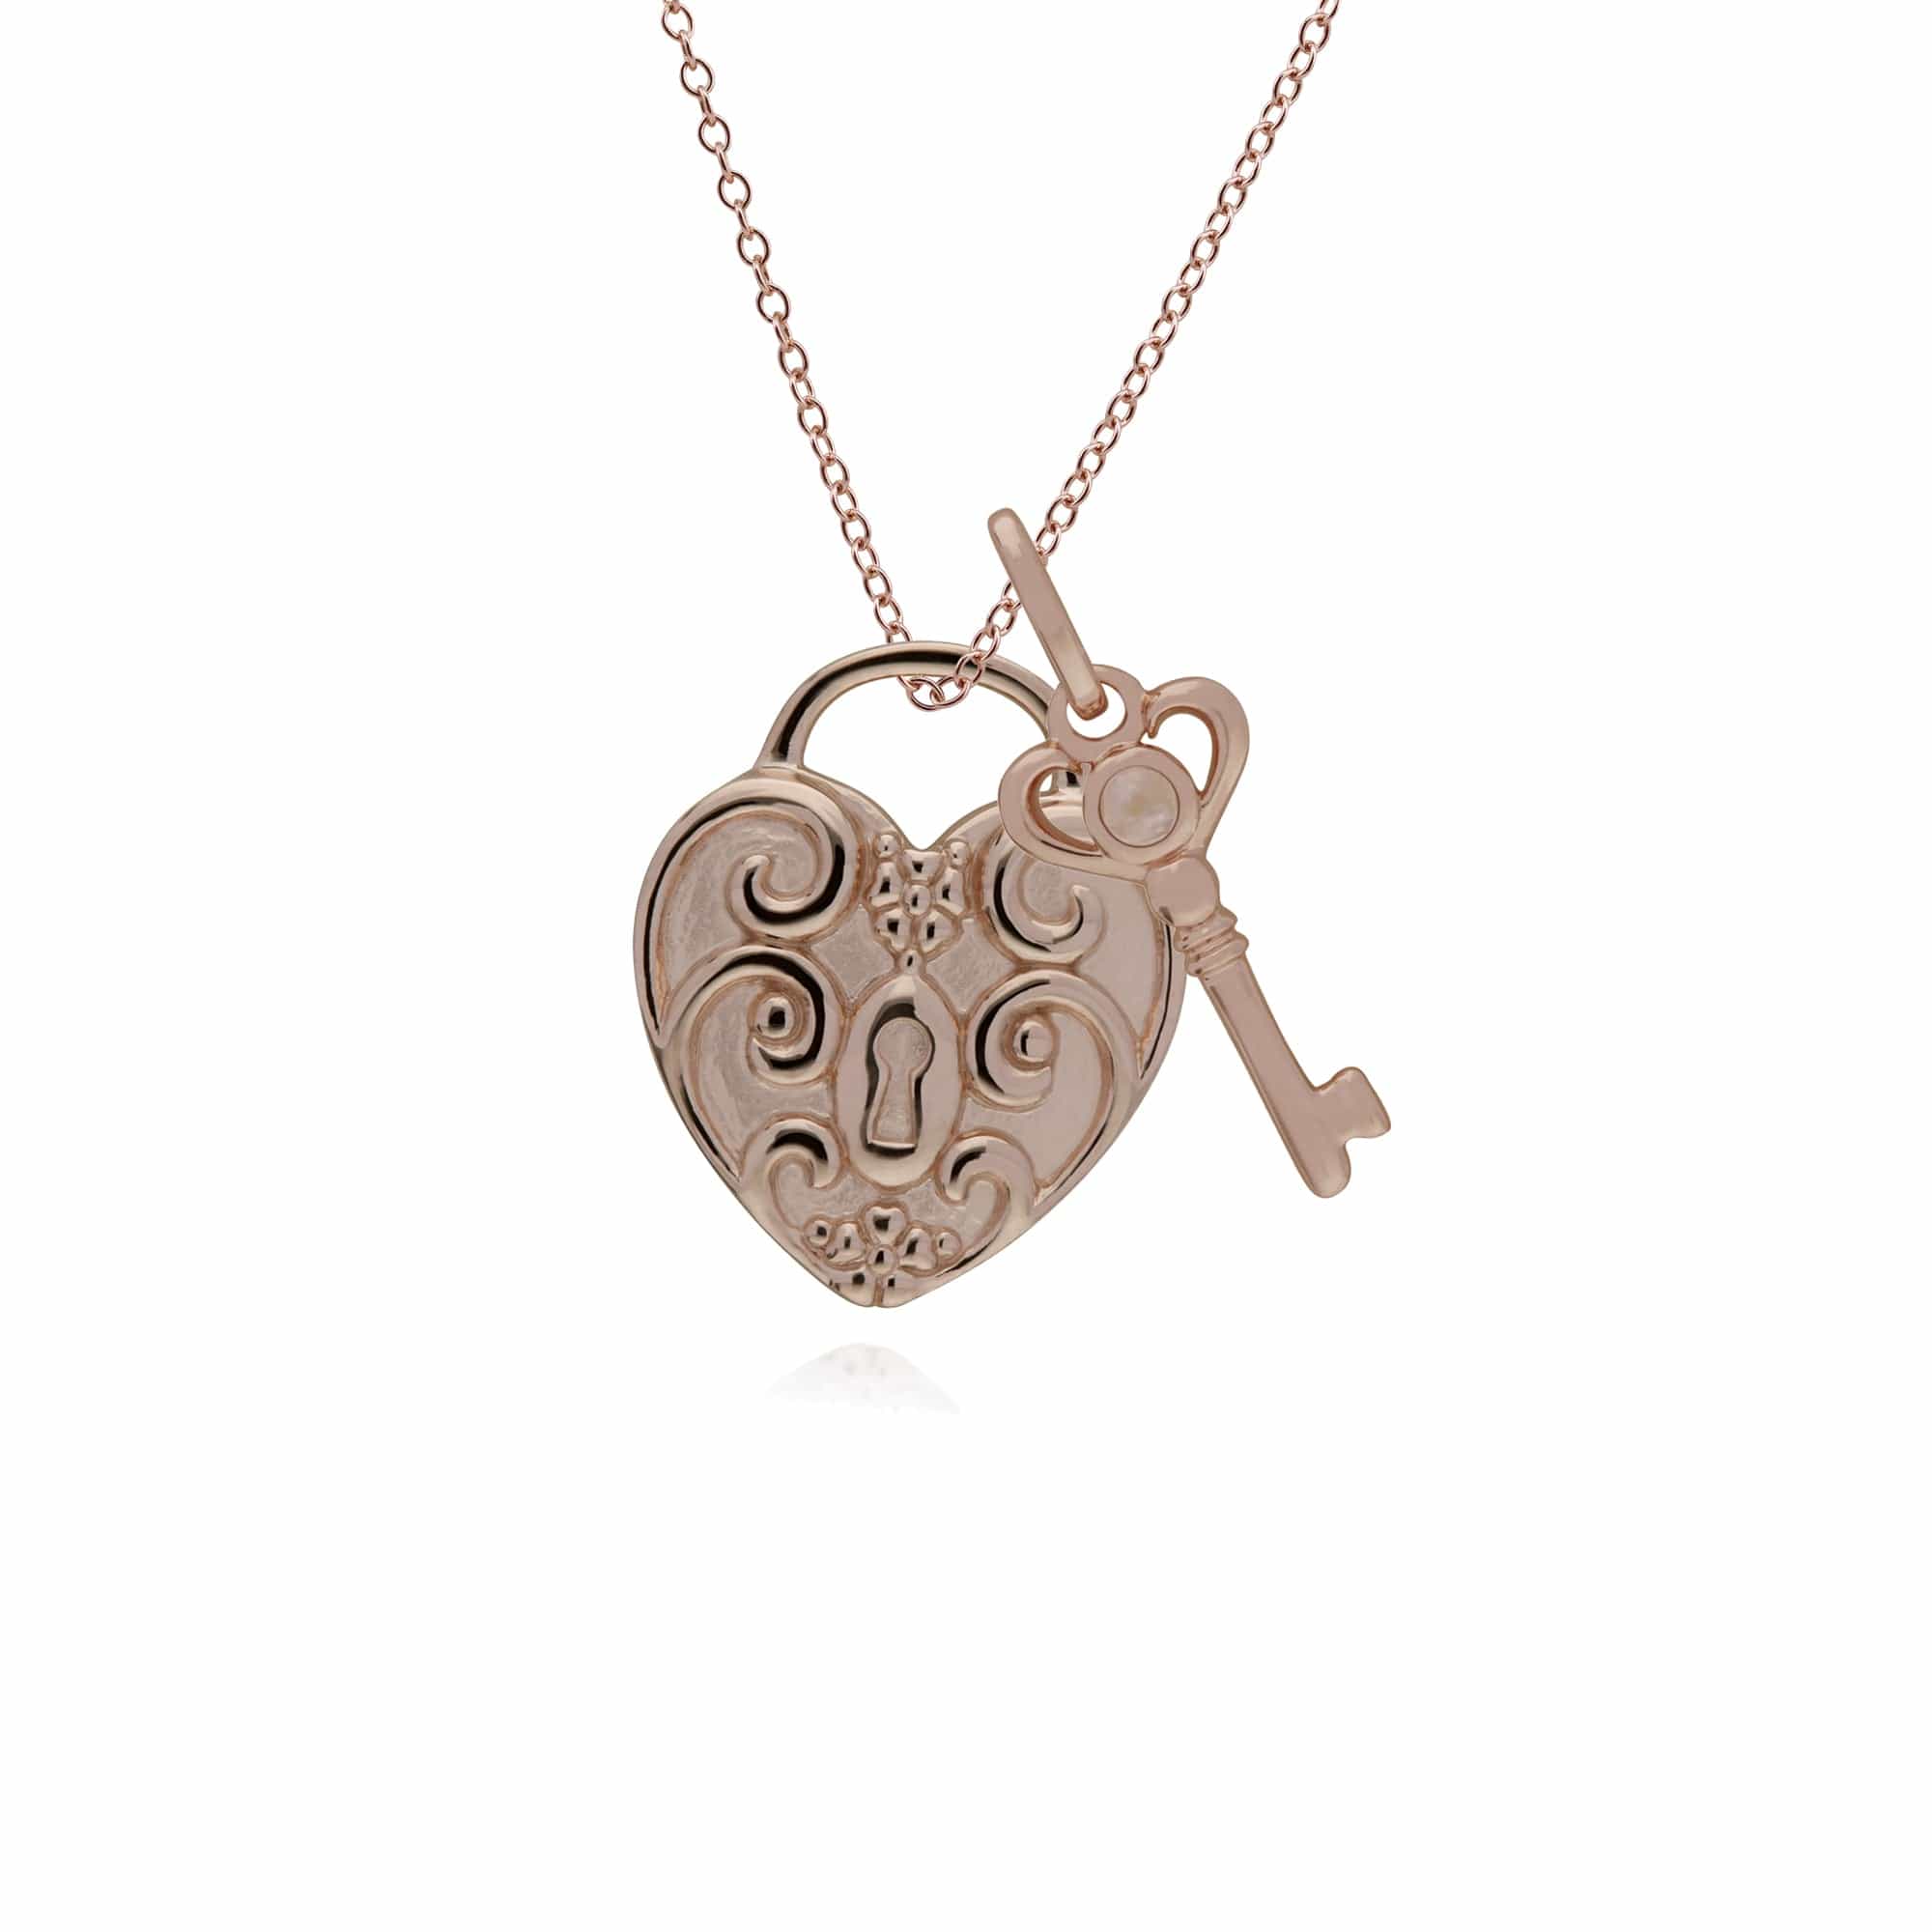 270P028601925-270P026501925 Classic Swirl Heart Lock Pendant & Rainbow Moonstone Key Charm in Rose Gold Plated 925 Sterling Silver 1